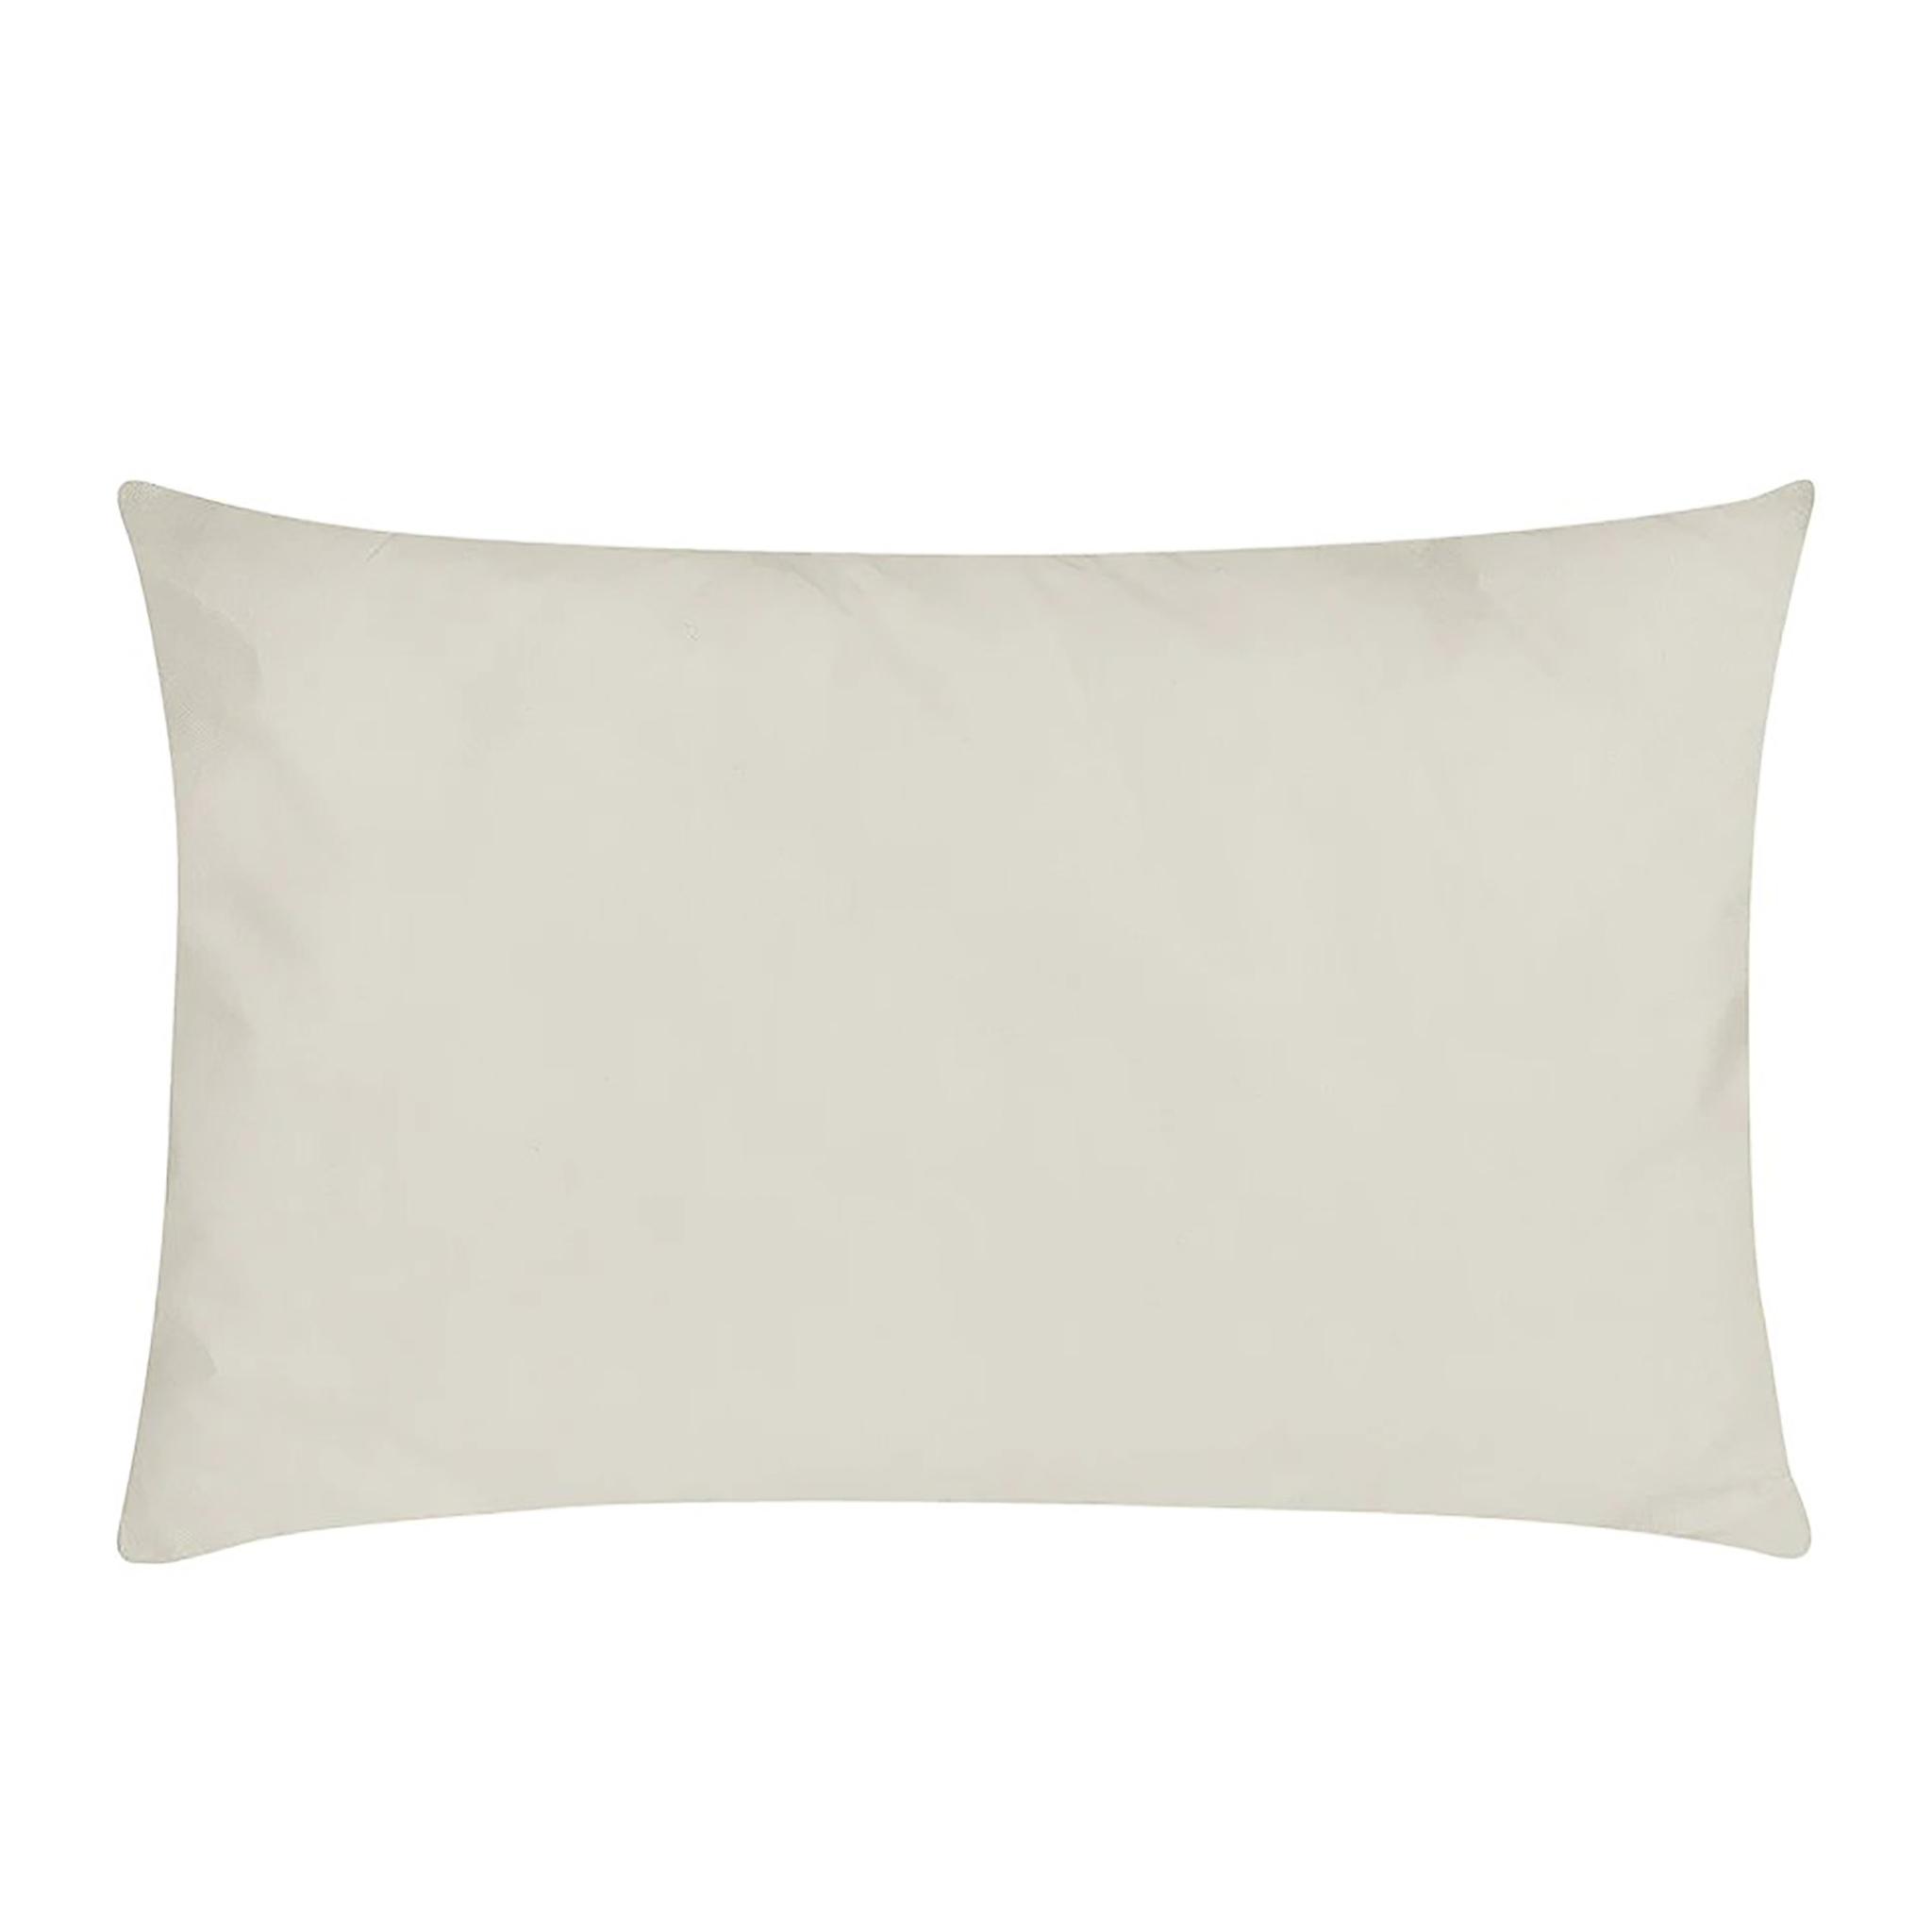 BLOMUS // FILL - CUSHION FILLING | 40 X 60 CM MADE OF 100% RECYCLED FEATHERS | WHITE